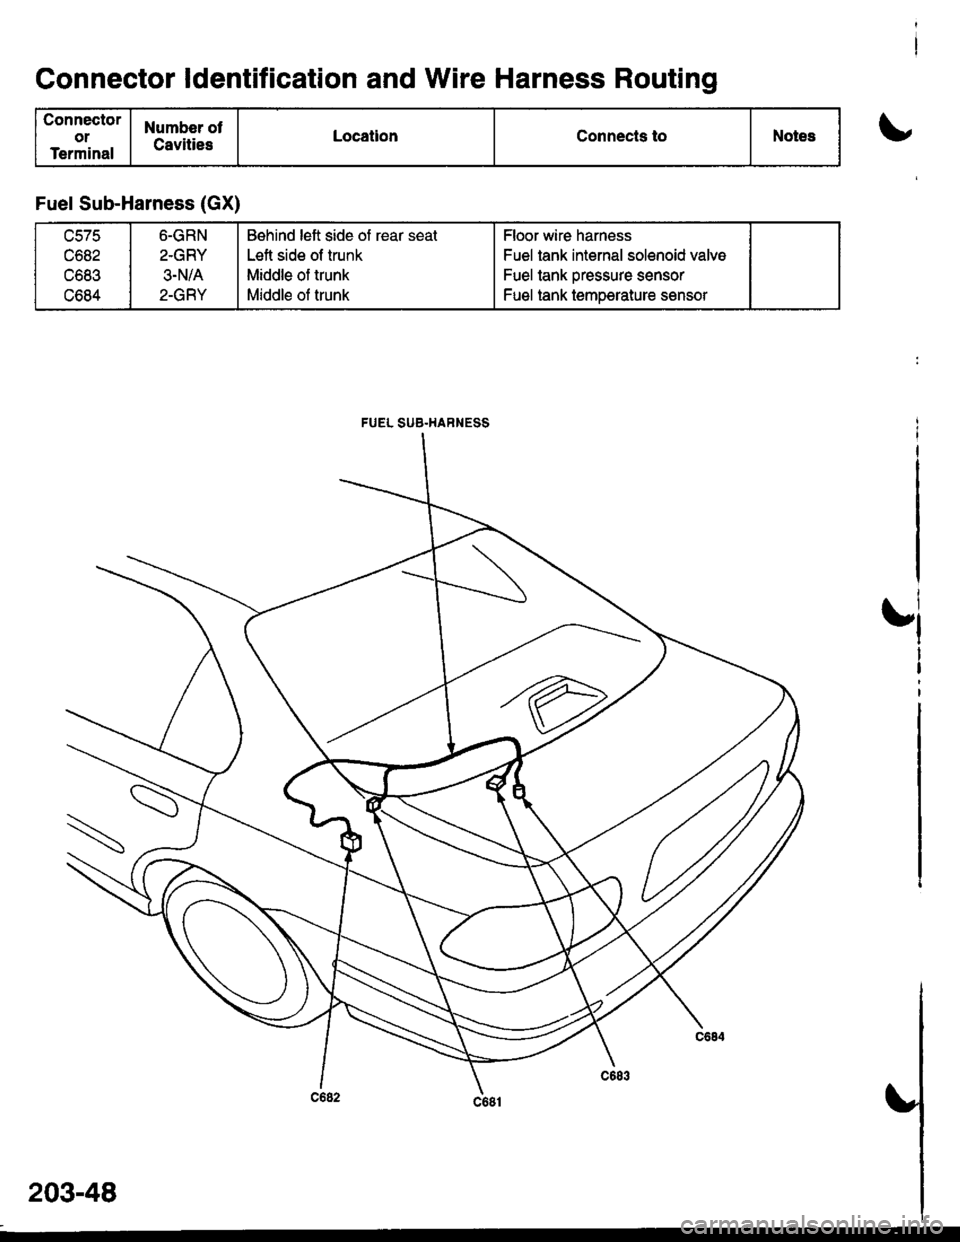 HONDA CIVIC 1996 6.G Workshop Manual Connector ldentification and Wire Harness Routing
Connector
ot
Terminal
Numbor ot
CavitiesLocationConnects toNotest
t
Fuel Sub-Harness (GX)
uc/c
c682
c683
c684
6-GRN
2-GRY
3-N/A
2-GRY
Behind left side